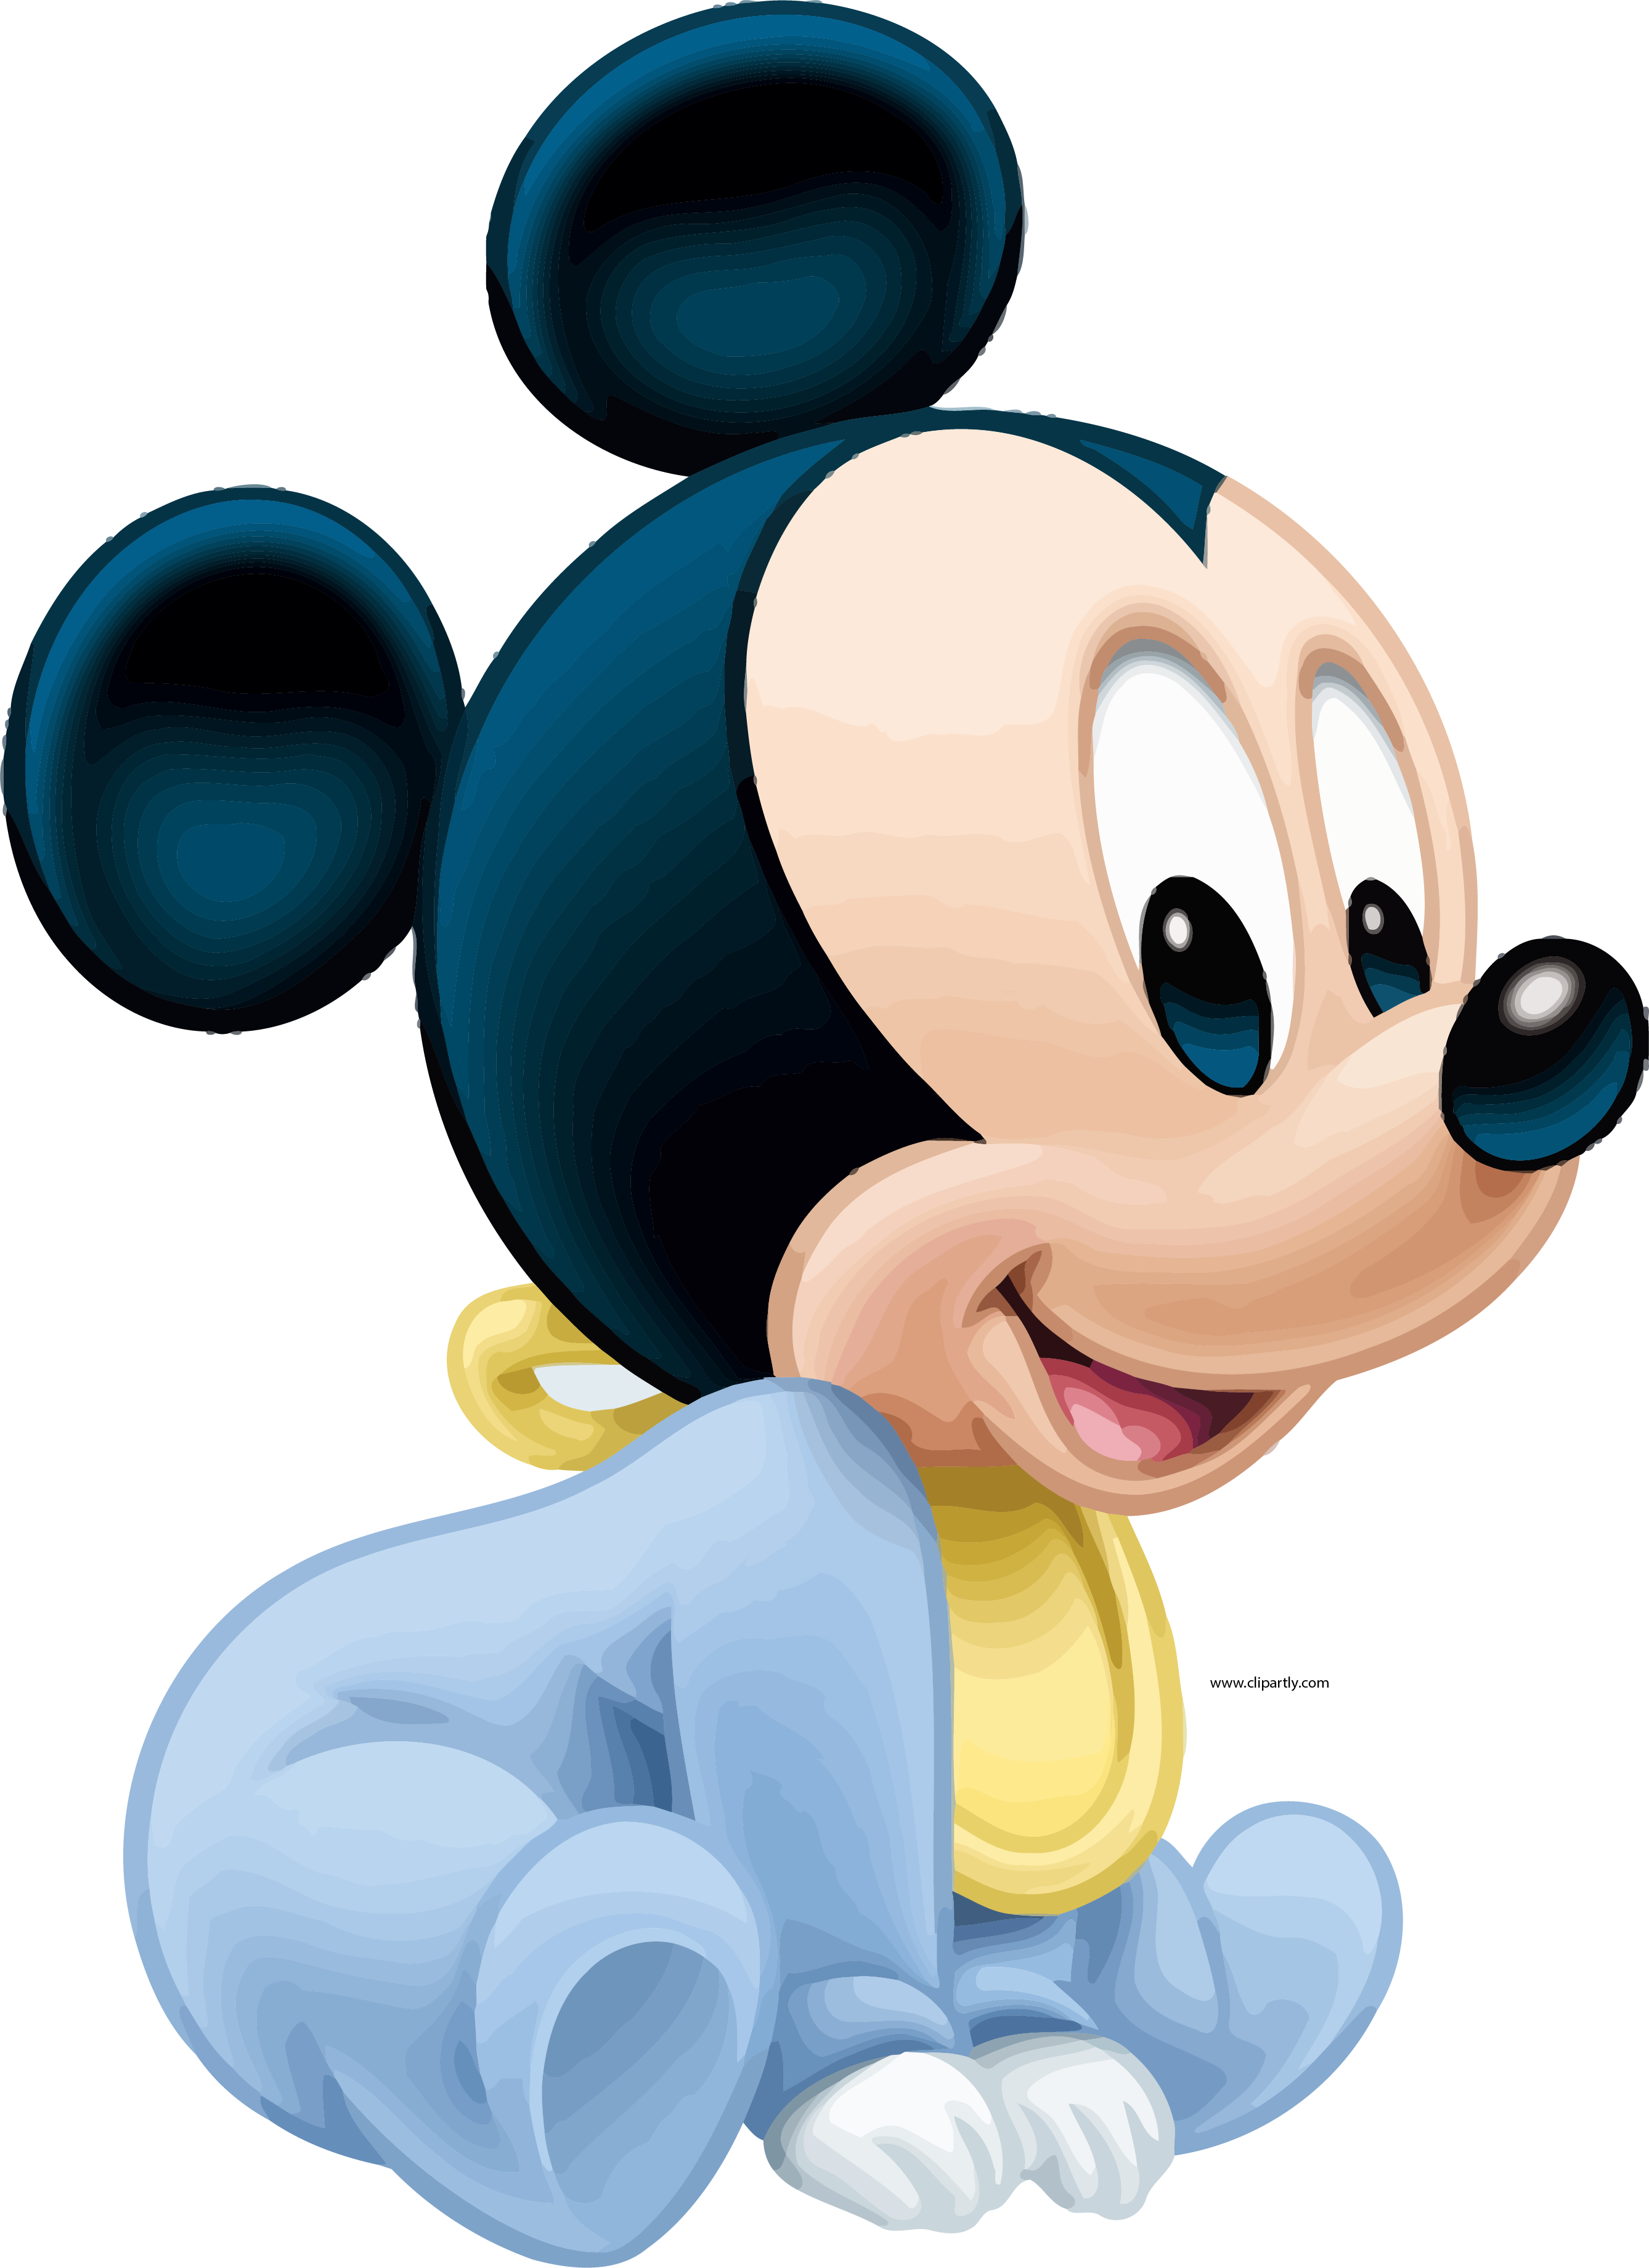 Download Mickey Infant Wallpaper Minnie Pluto Mouse HQ PNG Image   FreePNGImg